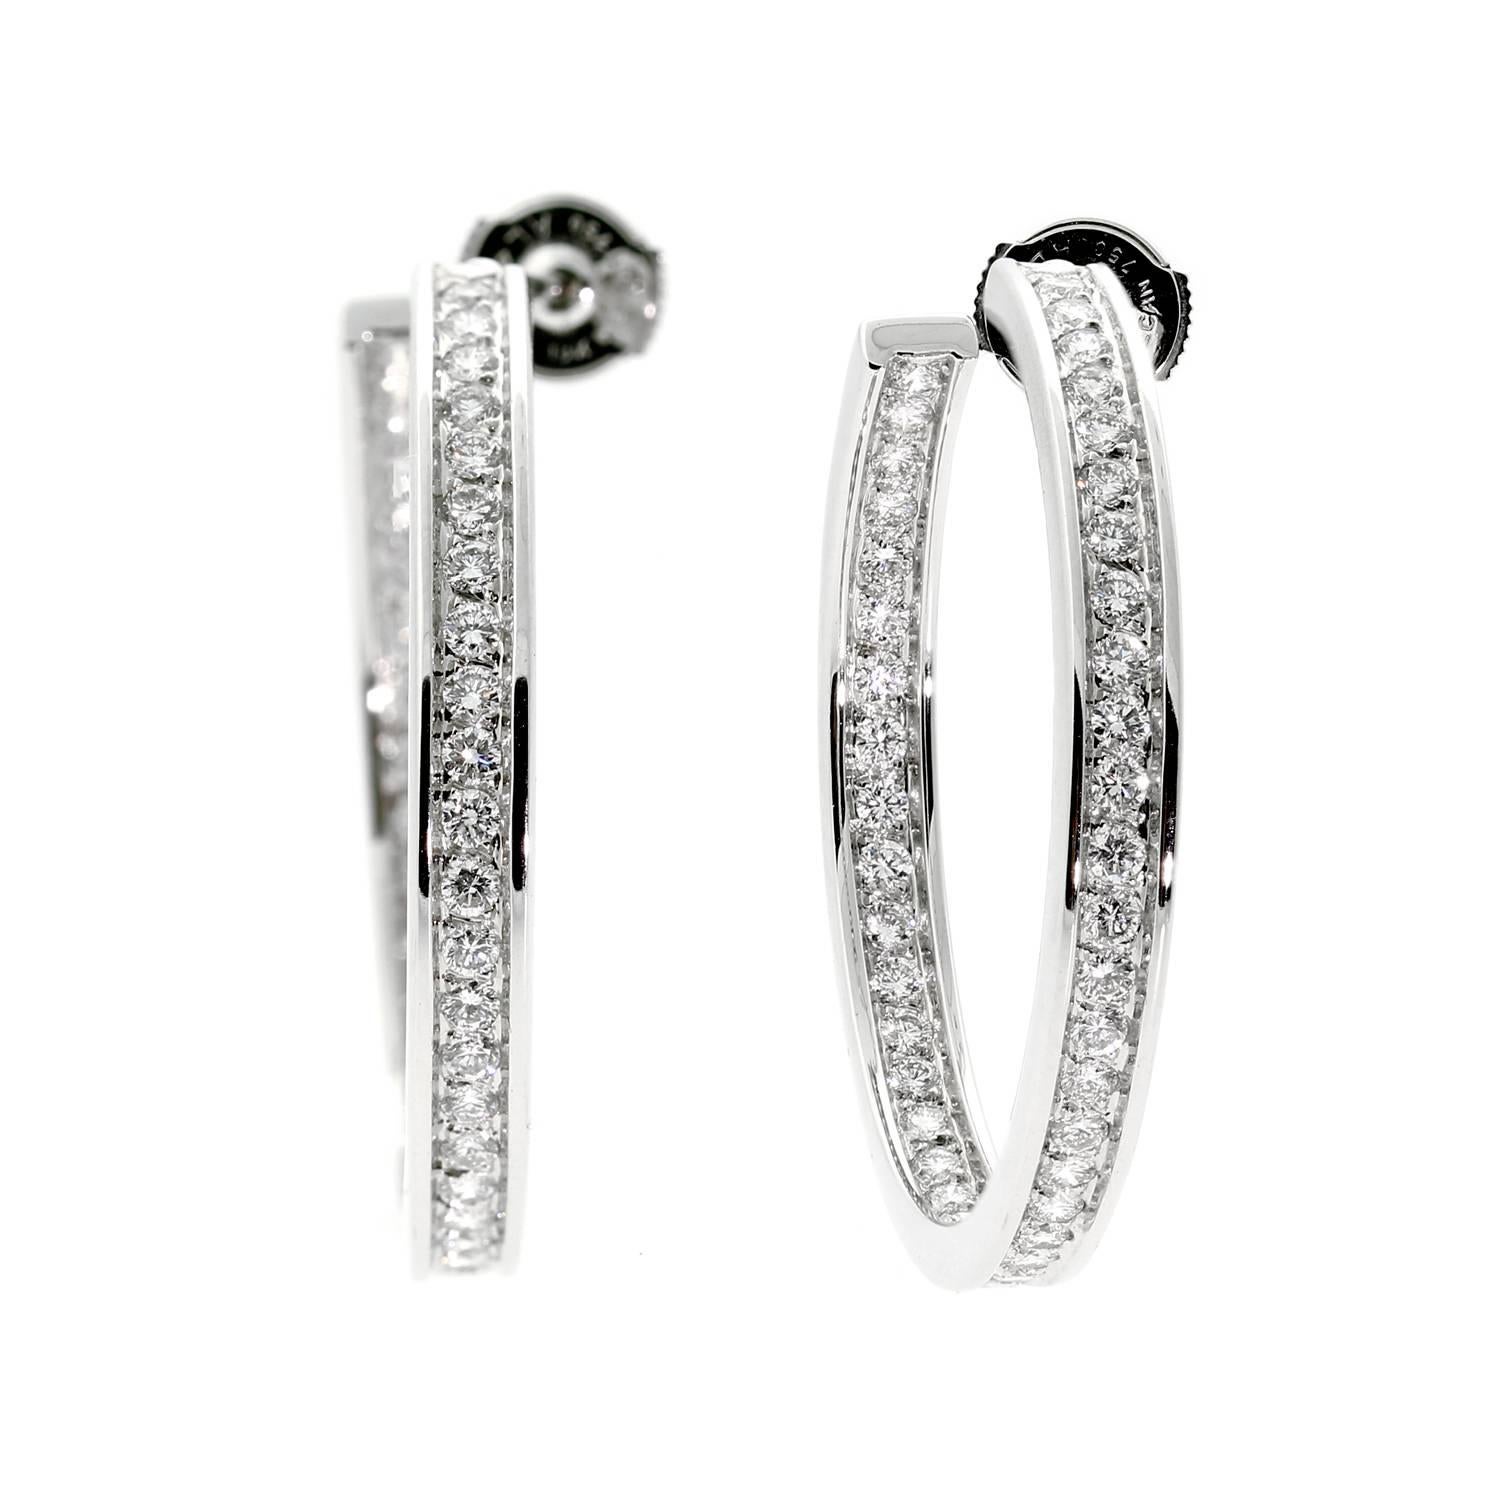 A magnificent pair of Cartier earrings featuring 3ct of the finest round brilliant cut diamonds set in 18k white gold.

1.41